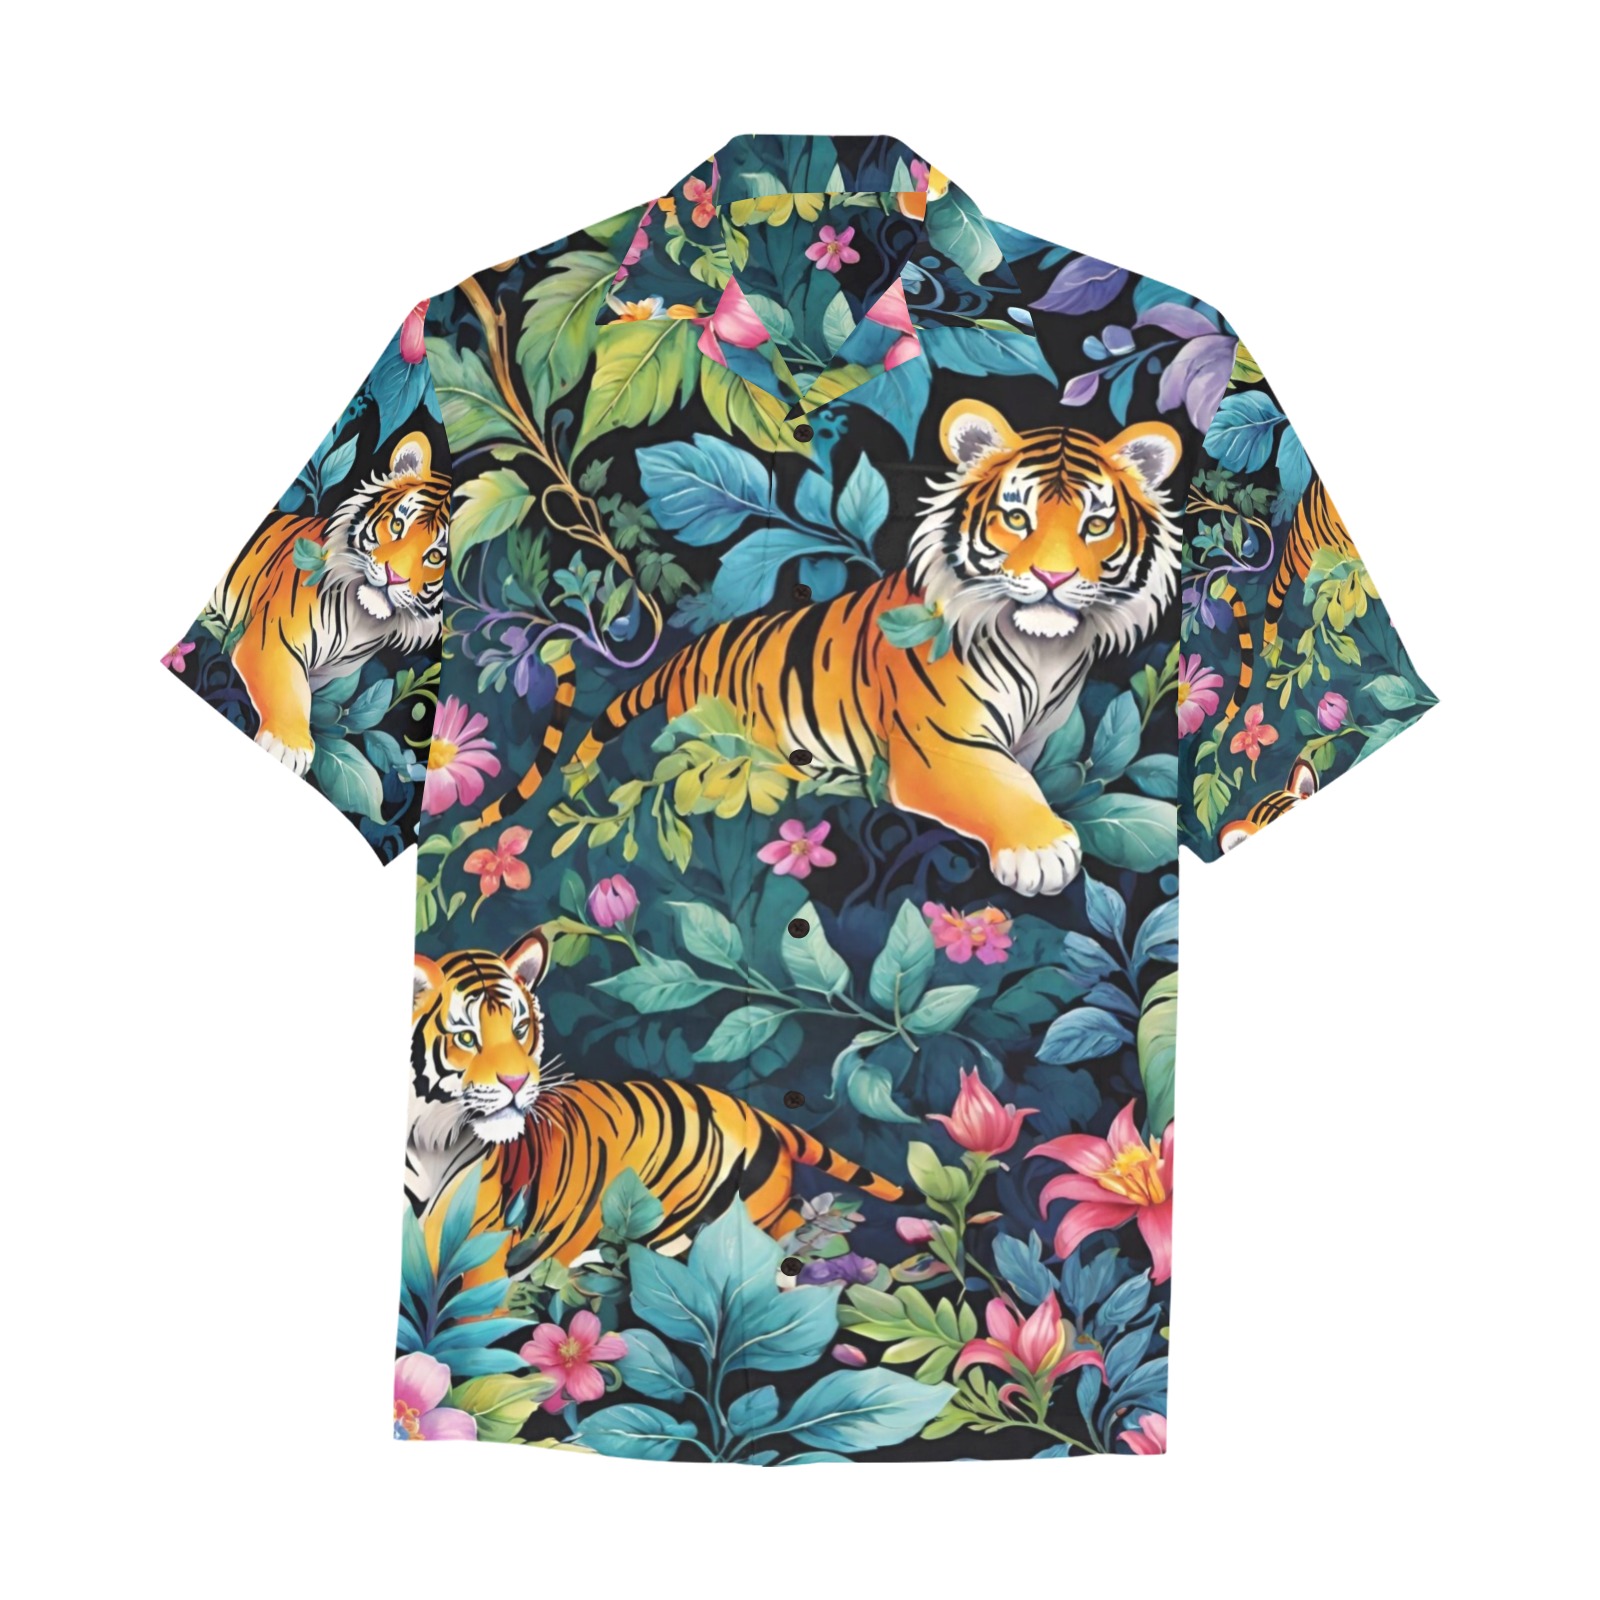 Jungle Tigers and Tropical Flowers Pattern Hawaiian Shirt with Chest Pocket&Merged Design (T58)